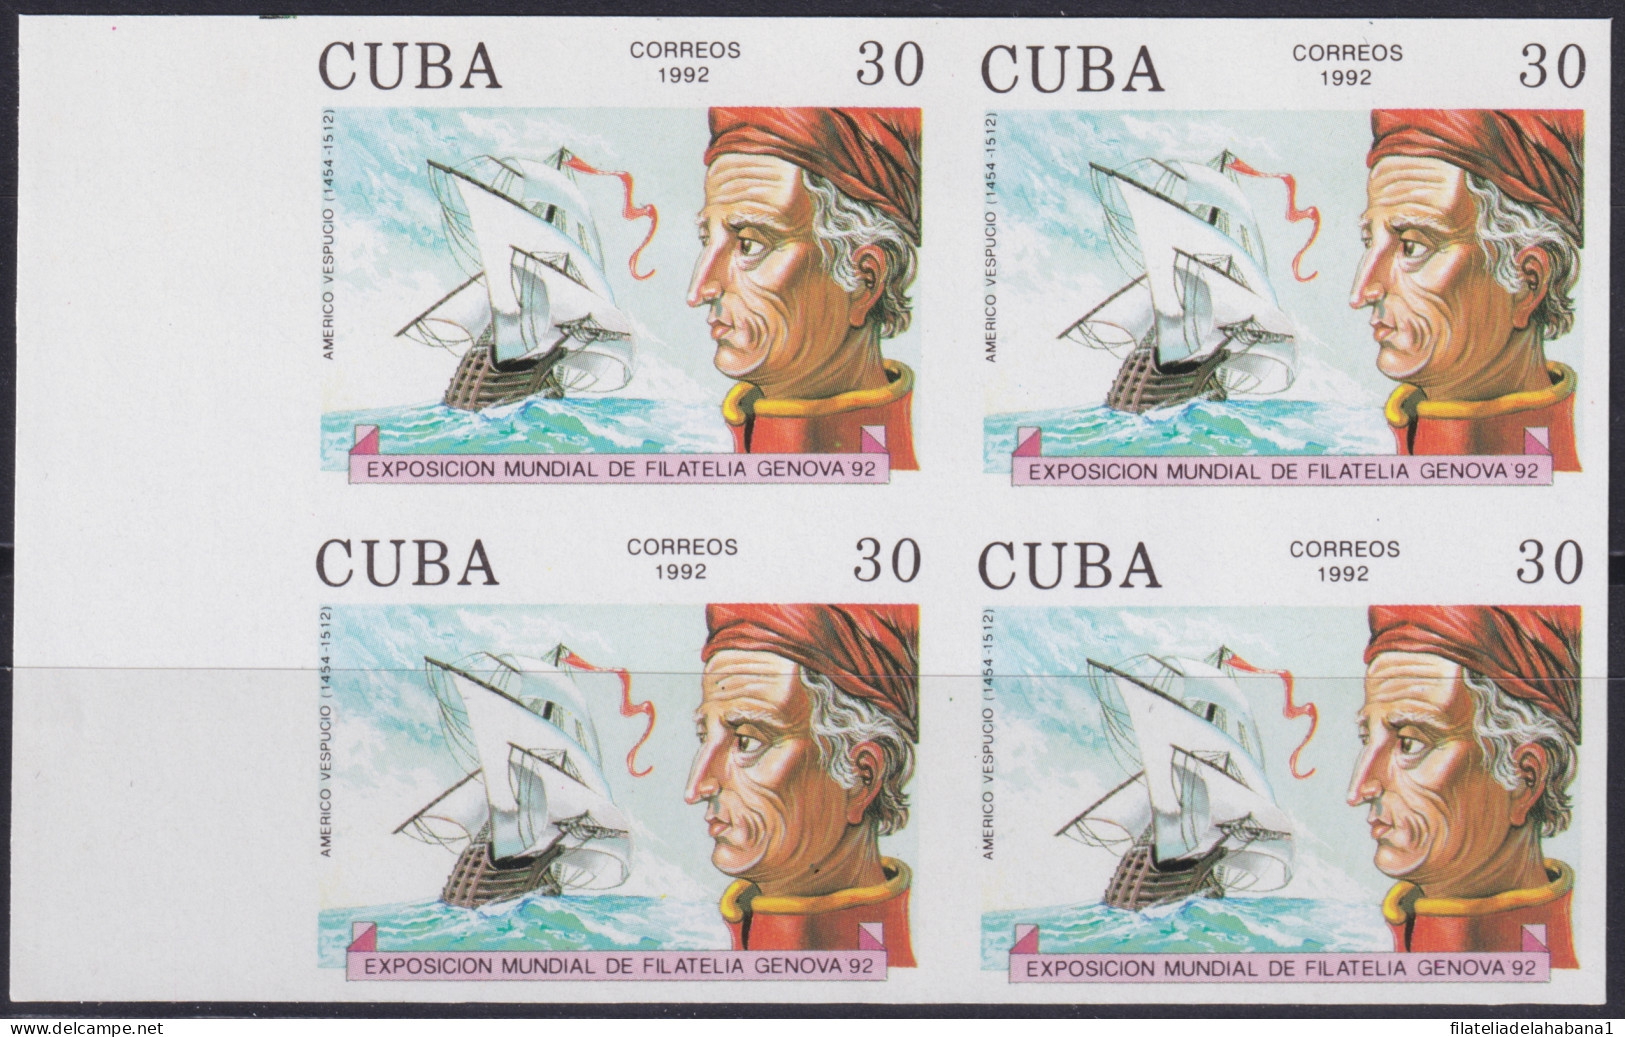 1992.105 CUBA 1992 MNH 30c IMPERFORATED PROOF AMERICO VESPUCIO DISCOVERY DESCUBRIMIENTO.  - Imperforates, Proofs & Errors